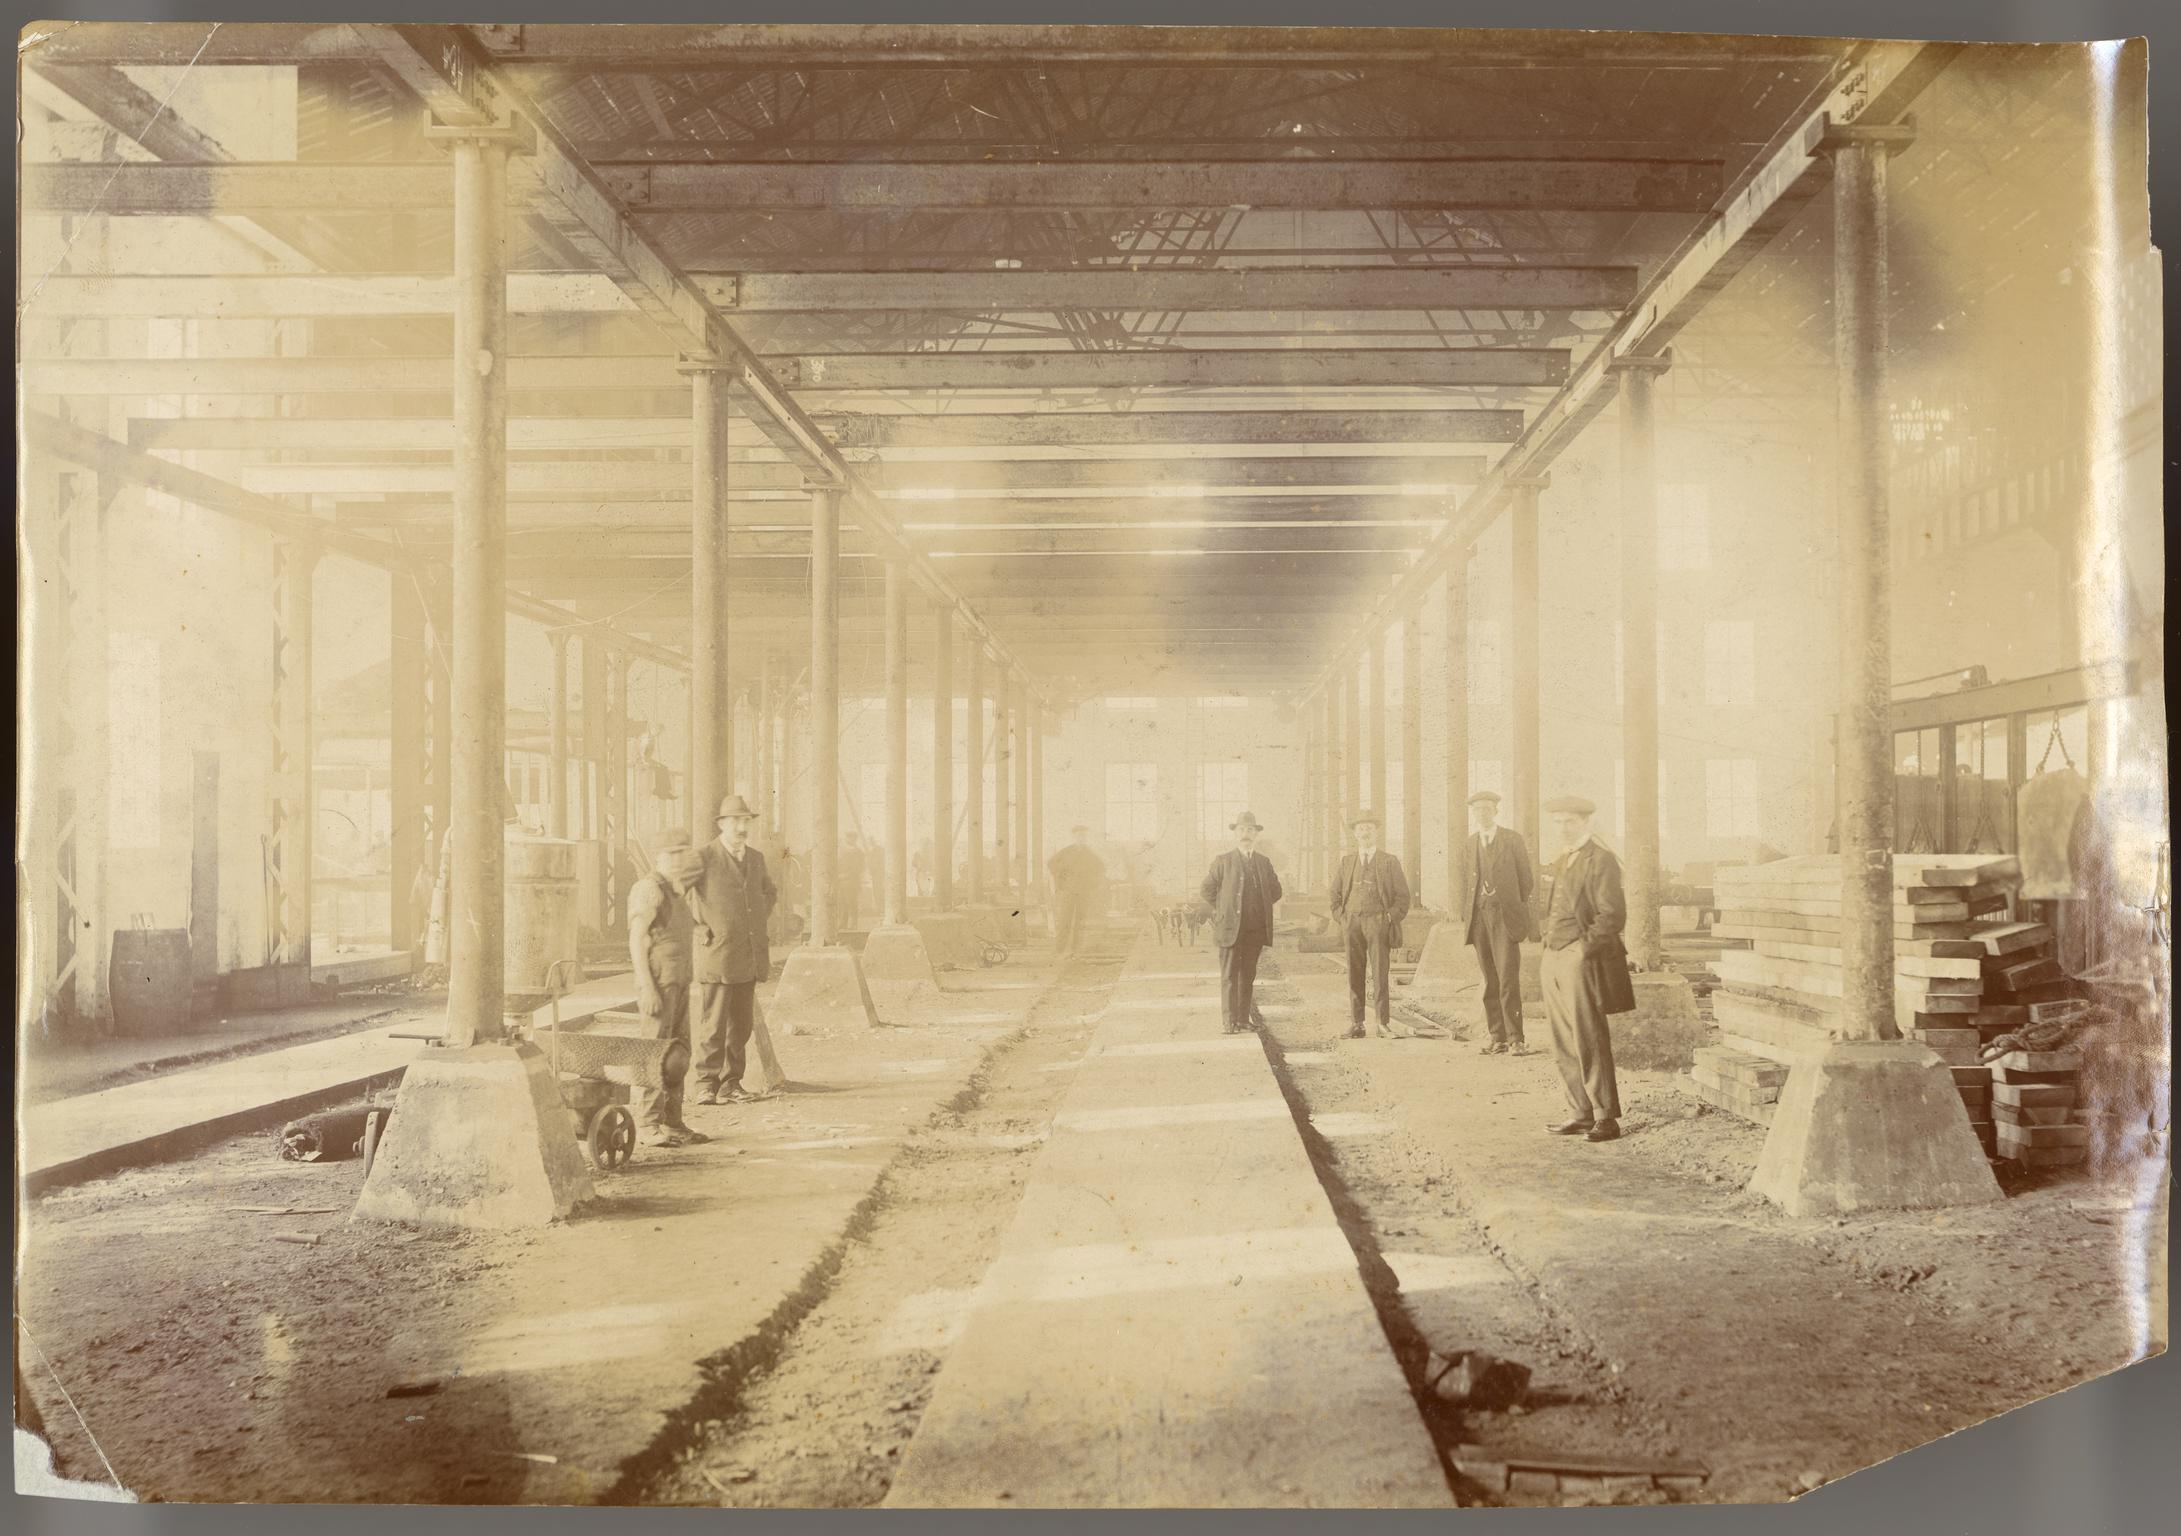 Shell making factory in Llanelli, photograph